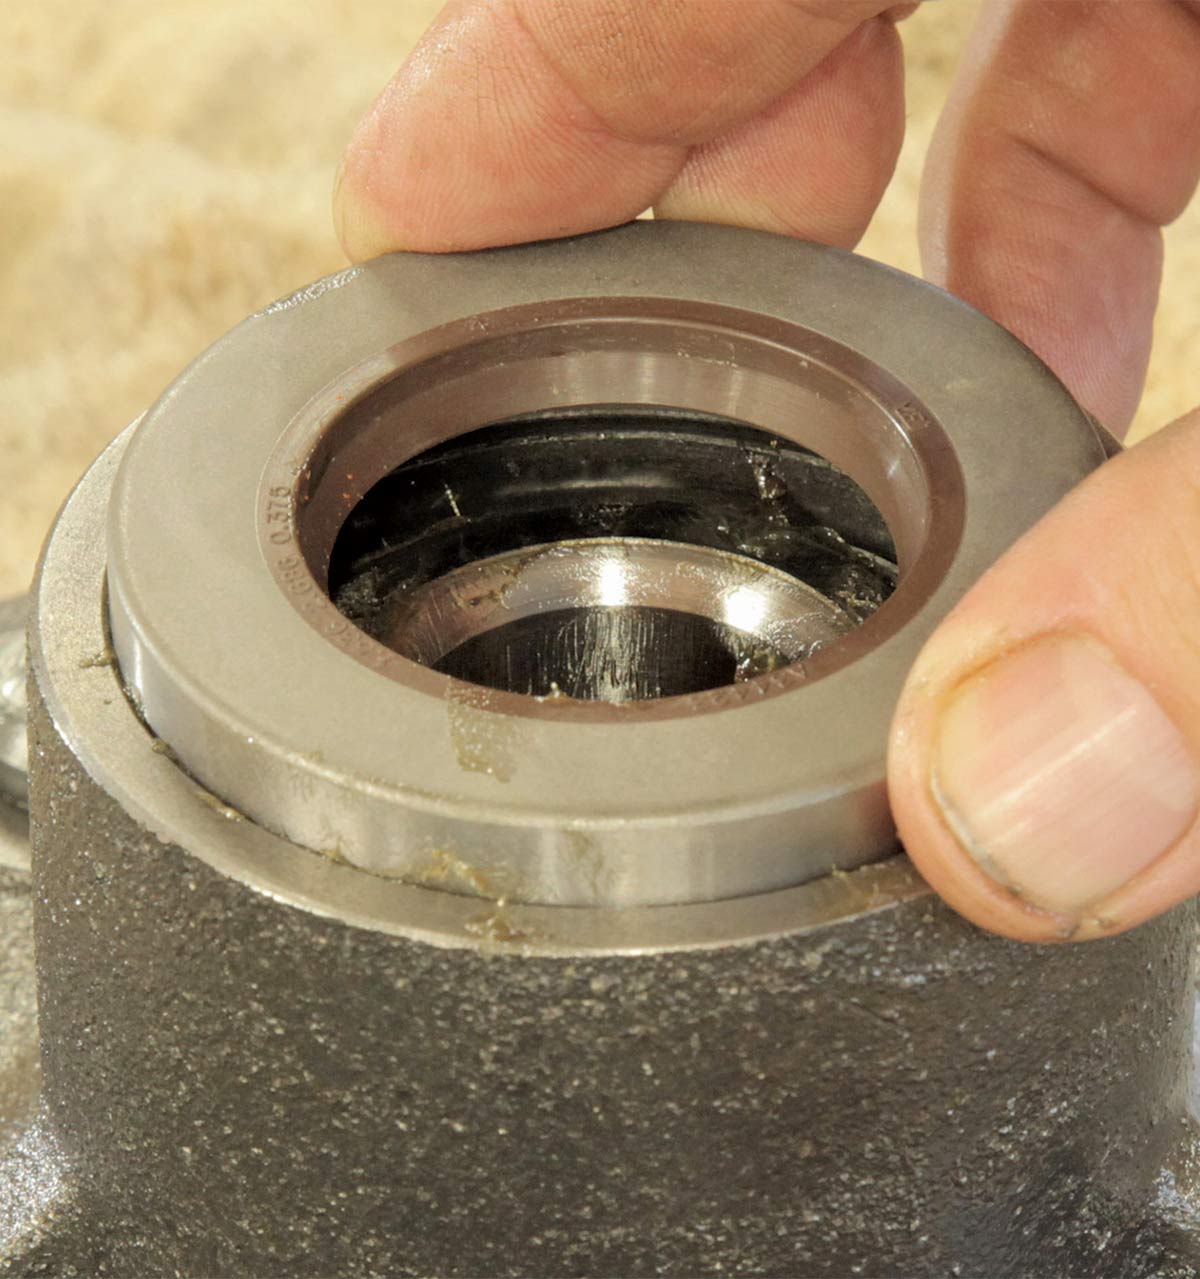 The bearing being held in place with a seal